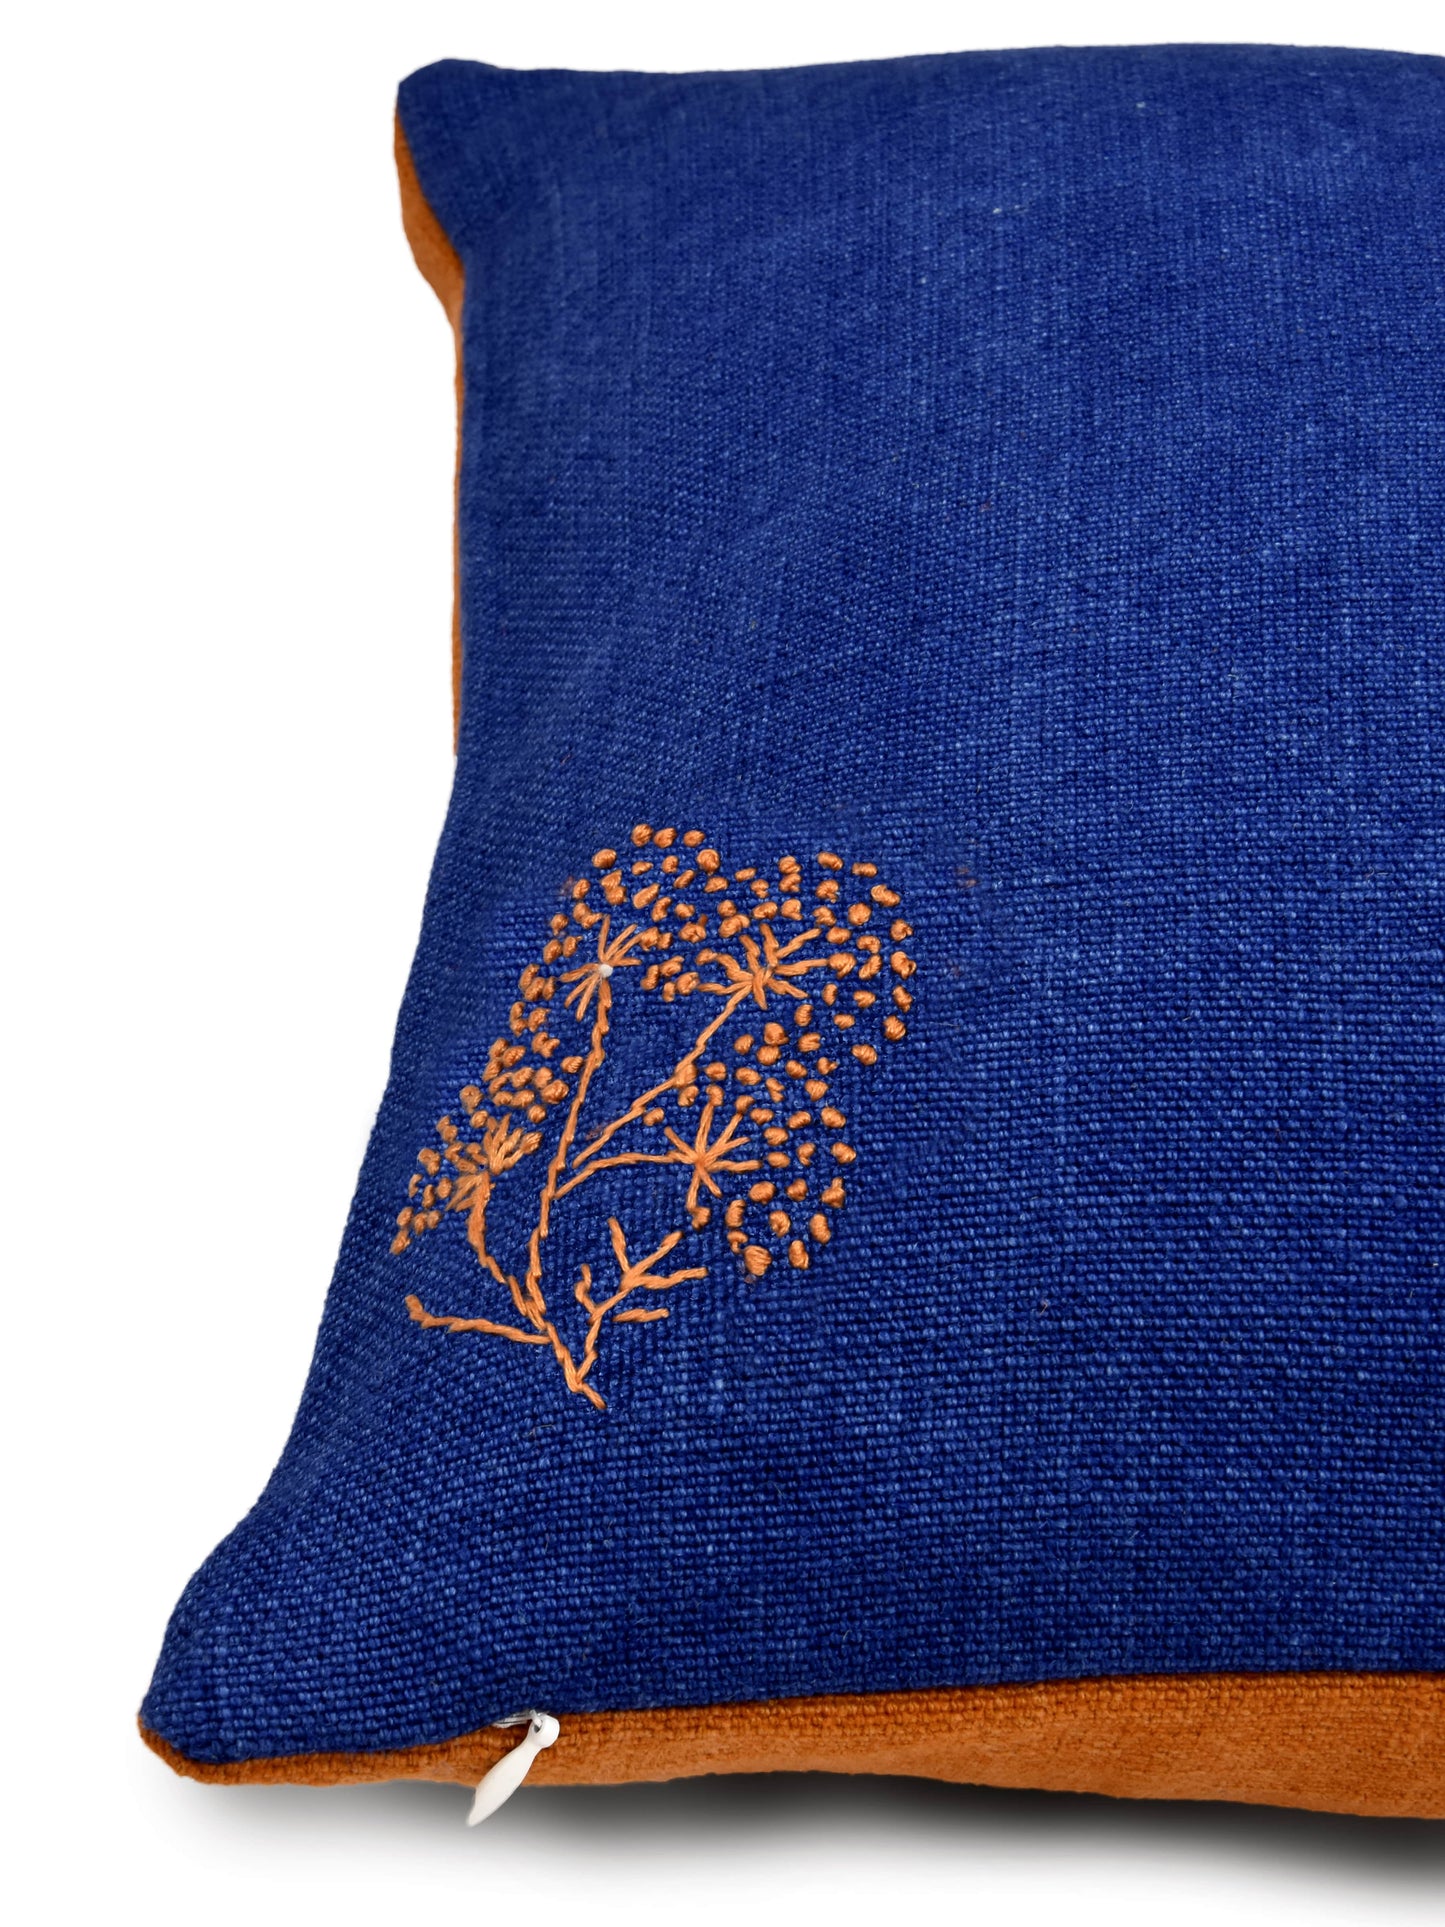 Blue and Orange Hemp Floral Hand Embroidered Cushion Cover